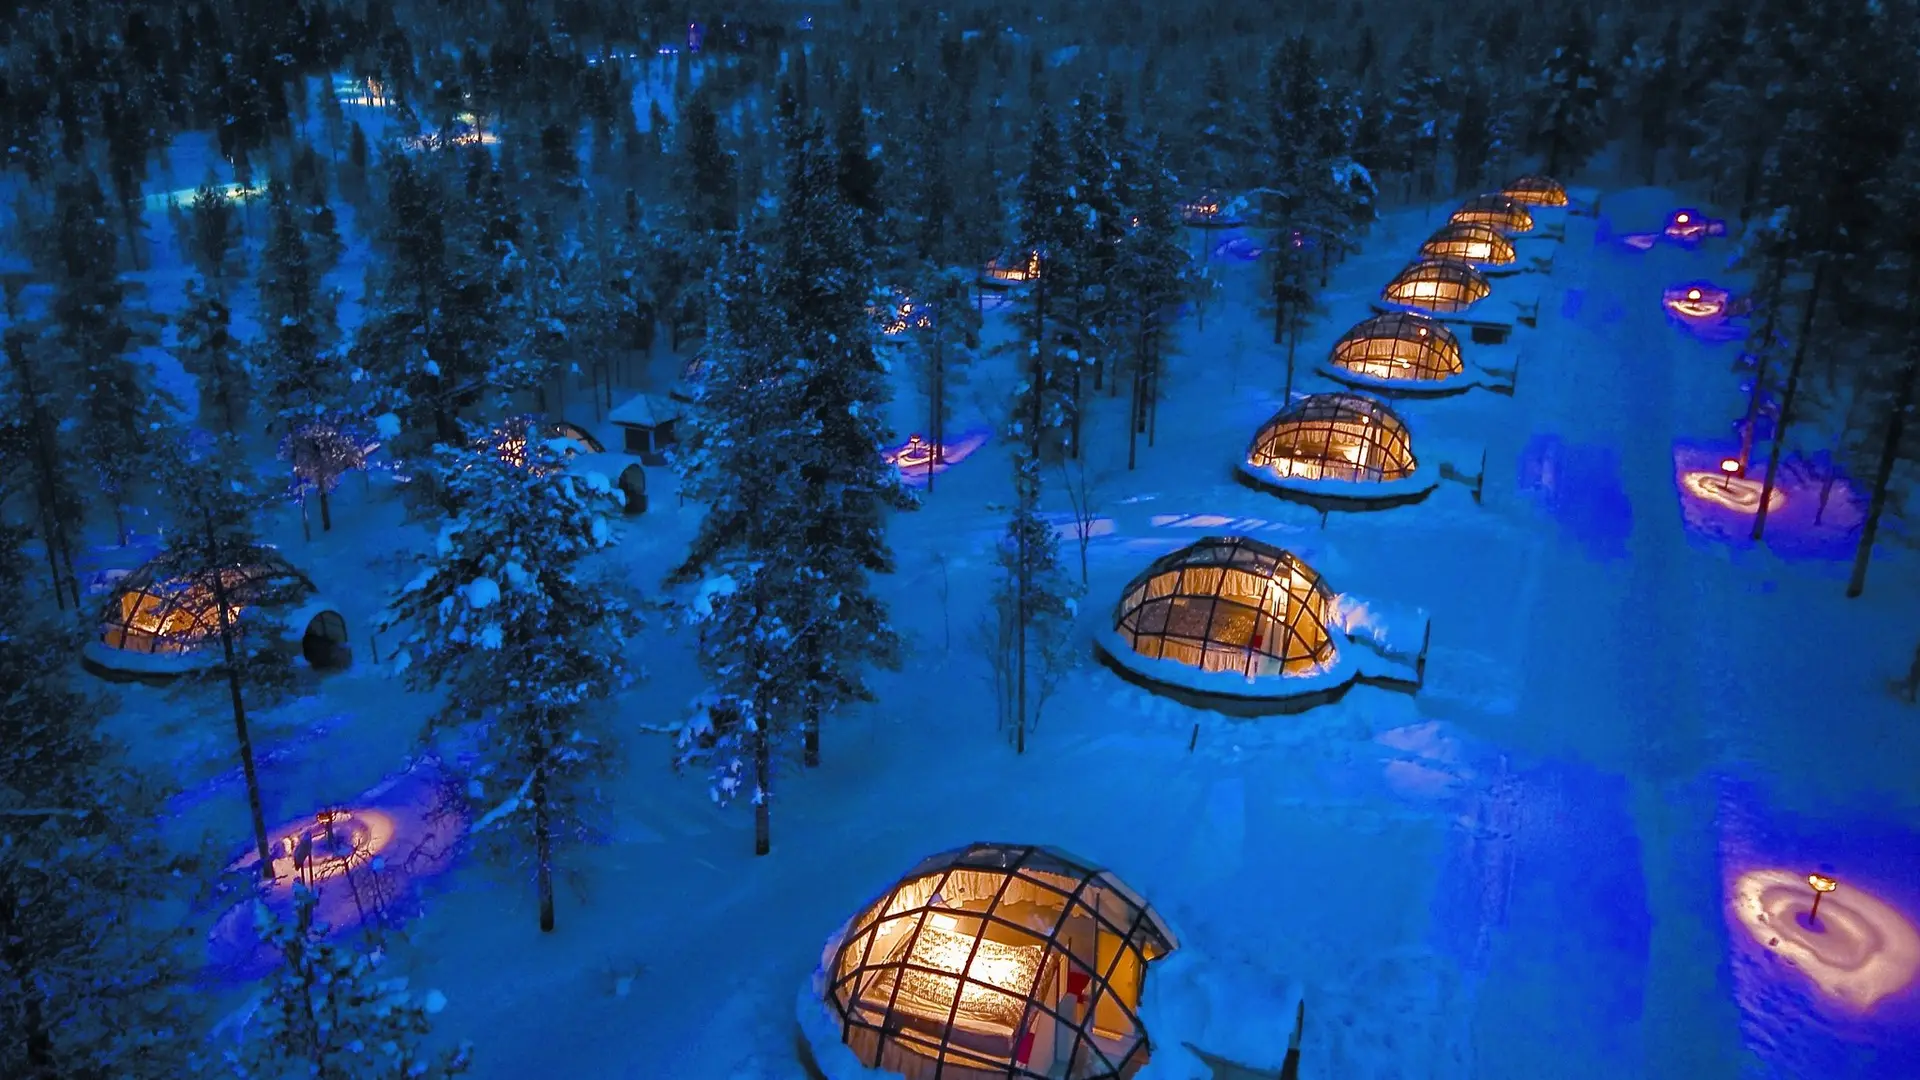 Hotel review Location' - Kakslauttanen Arctic Resort - Igloos and Chalets - 1